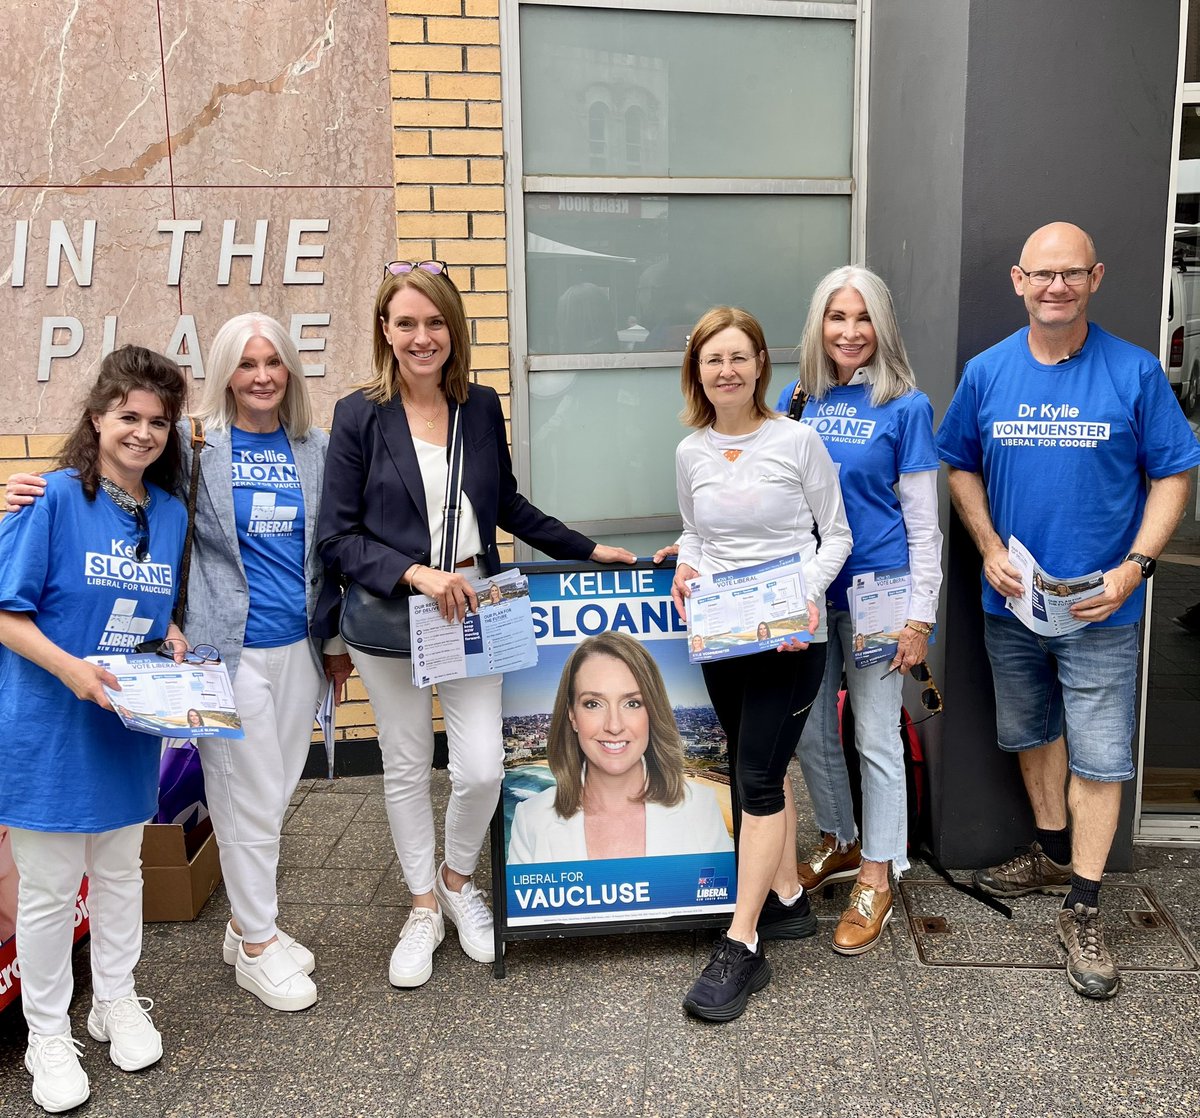 Out with our @LiberalNSW team supporting the wonderful @kelliesloane! #womenforelection @YoungLibs